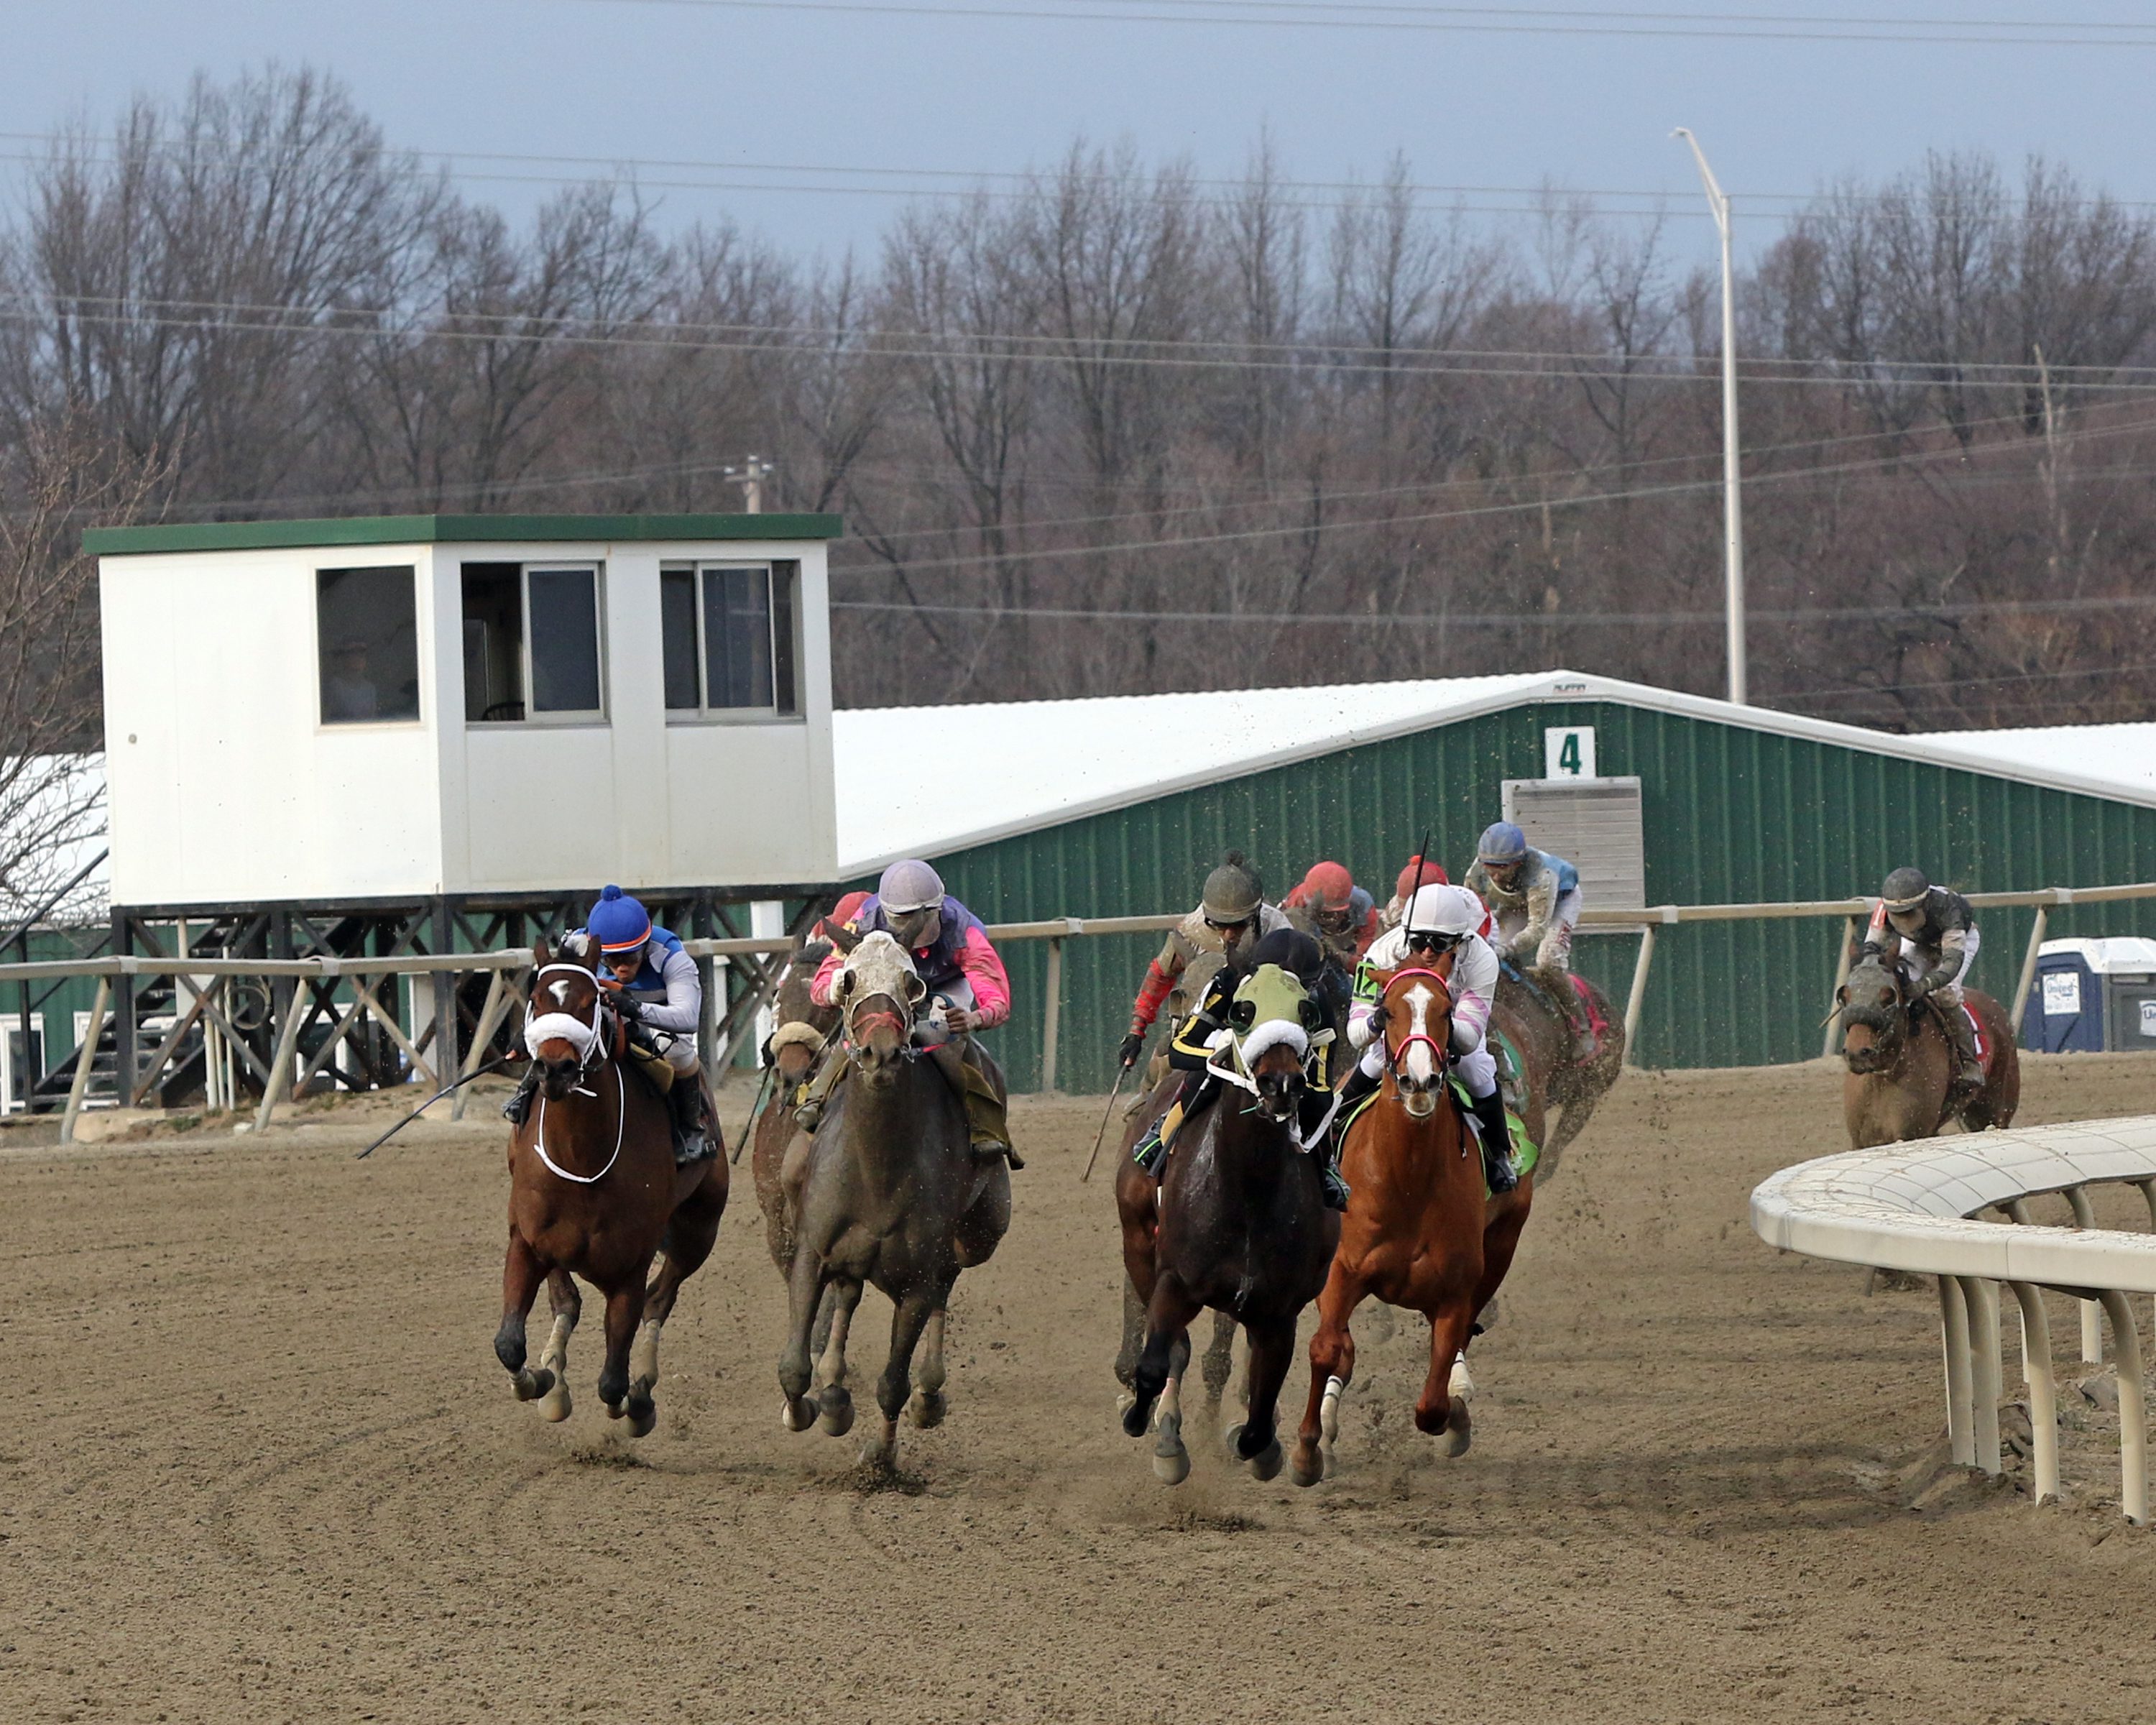 The final turn of Race 7 at Parx on March 7, 2022. Photo By: Chad B. Harmon